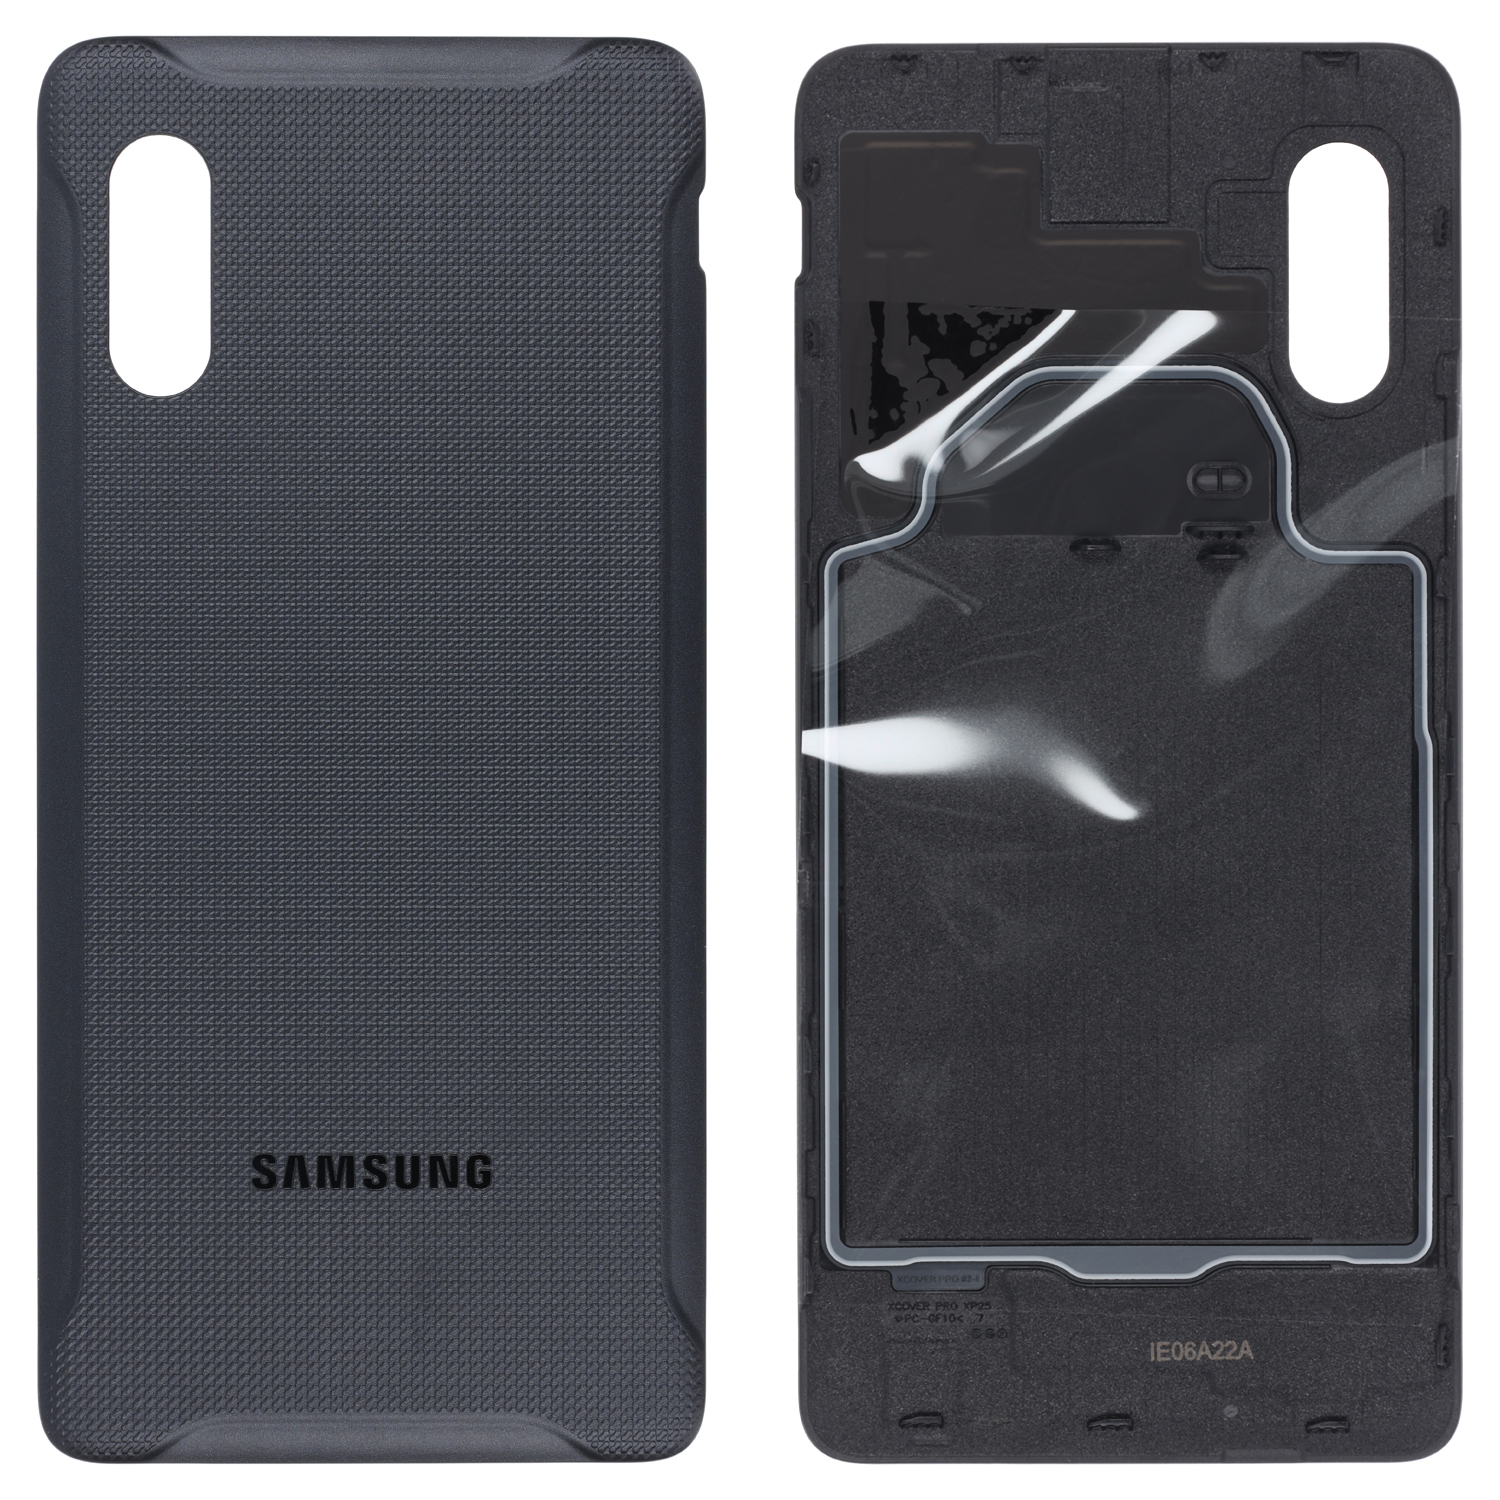 Samsung Galaxy XCover Pro (G715F) Battery Cover, Black